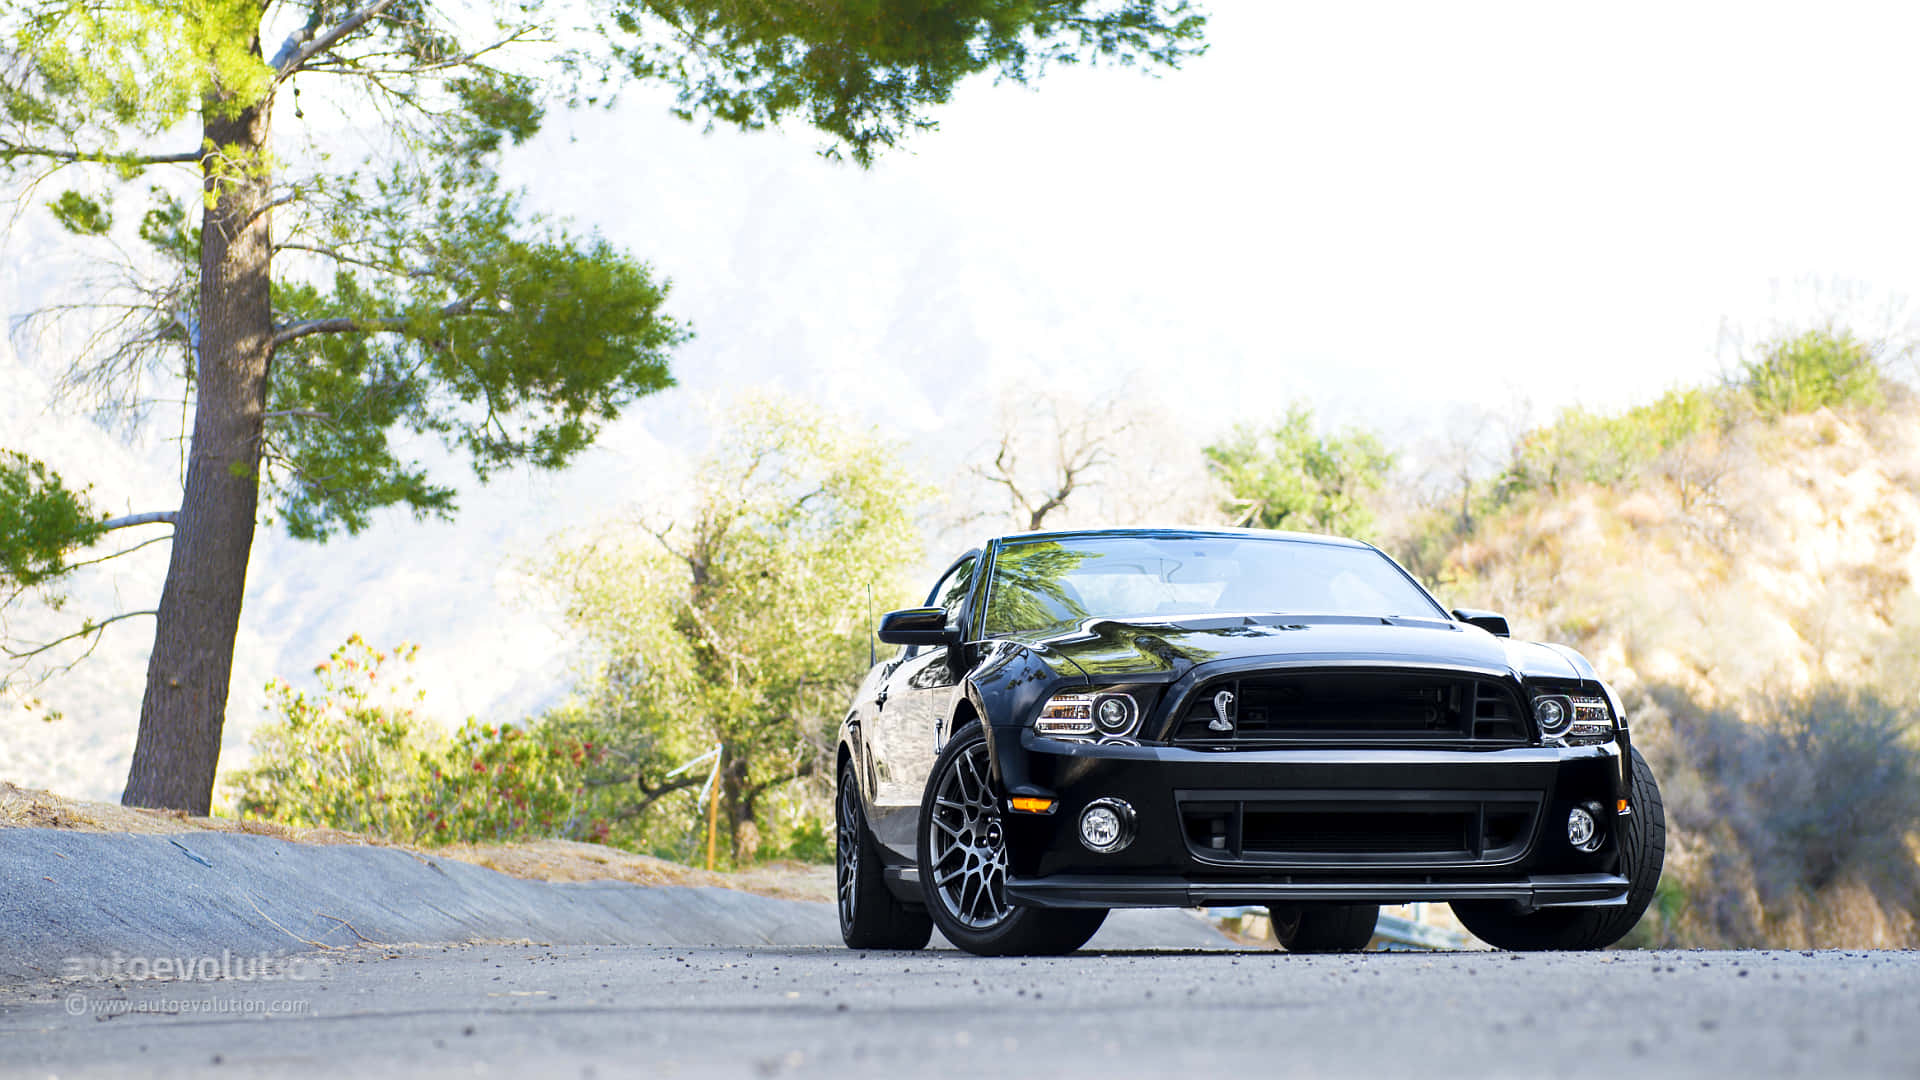 Ford Mustang 2013 Shelby GT500 Car Wallpaper